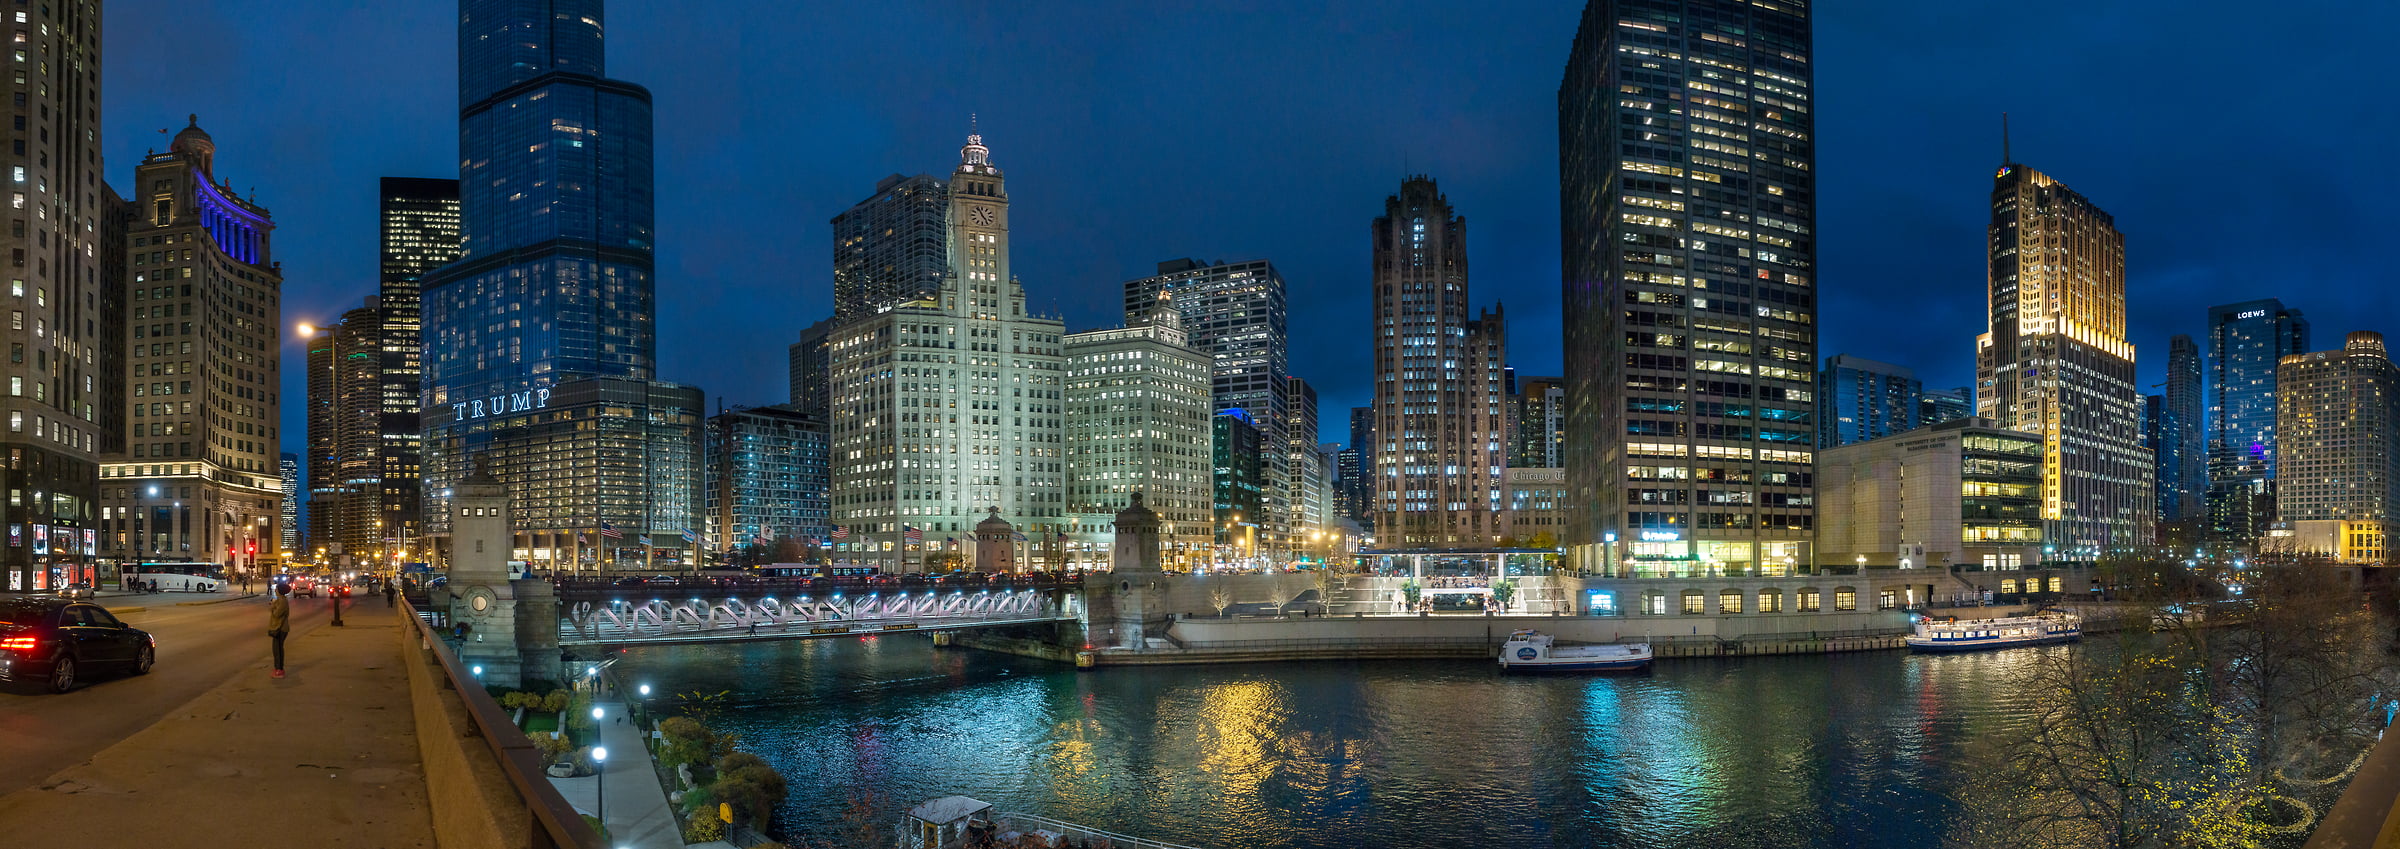 242 megapixels! A very high resolution, large-format VAST photo print of the Chicago River at night with the Chicago skyline; cityscape photograph created by Peter Rodger in Chicago River, Michigan Avenue, Chicago.